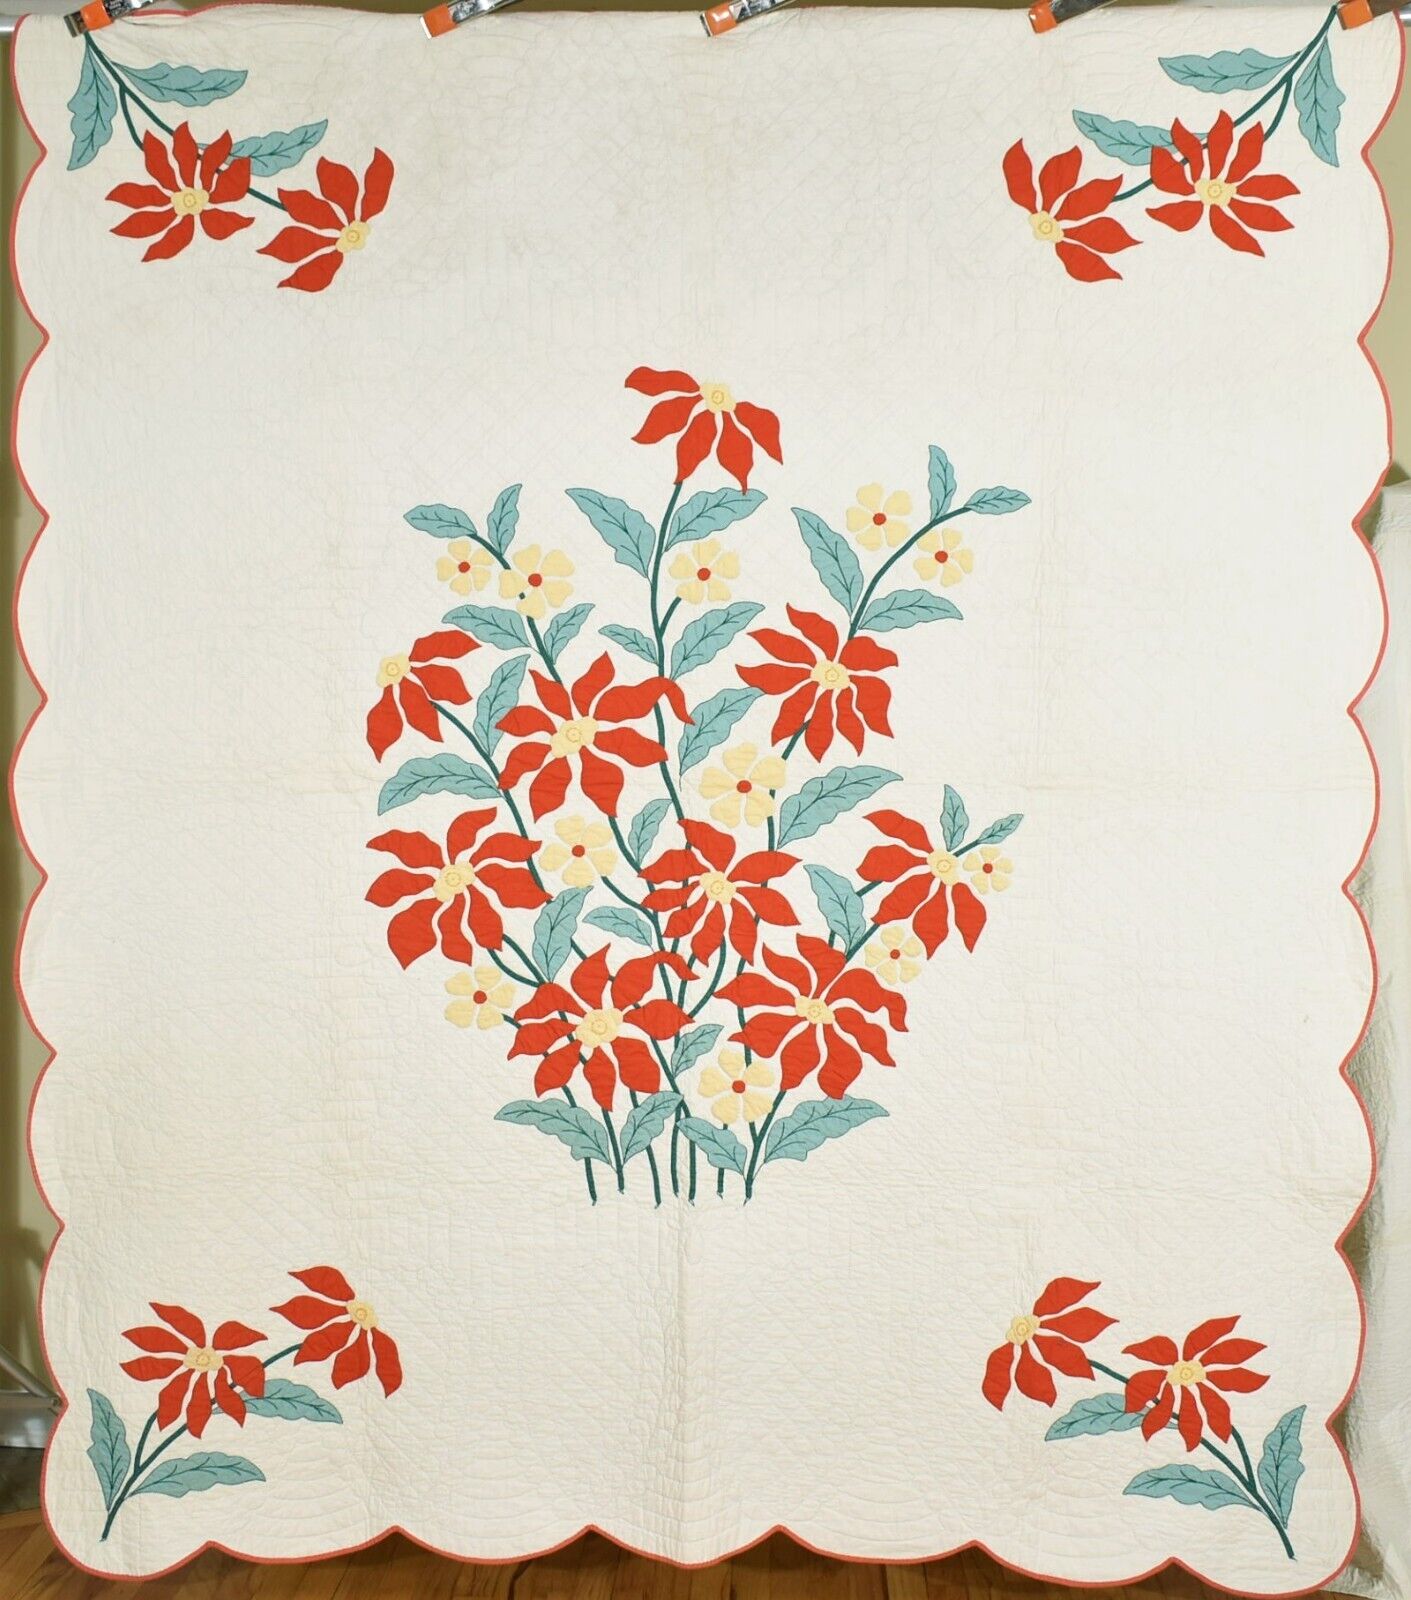 Well Quilted Vintage 1930's Poinsettia Applique Antique Quilt ~Holiday Colors